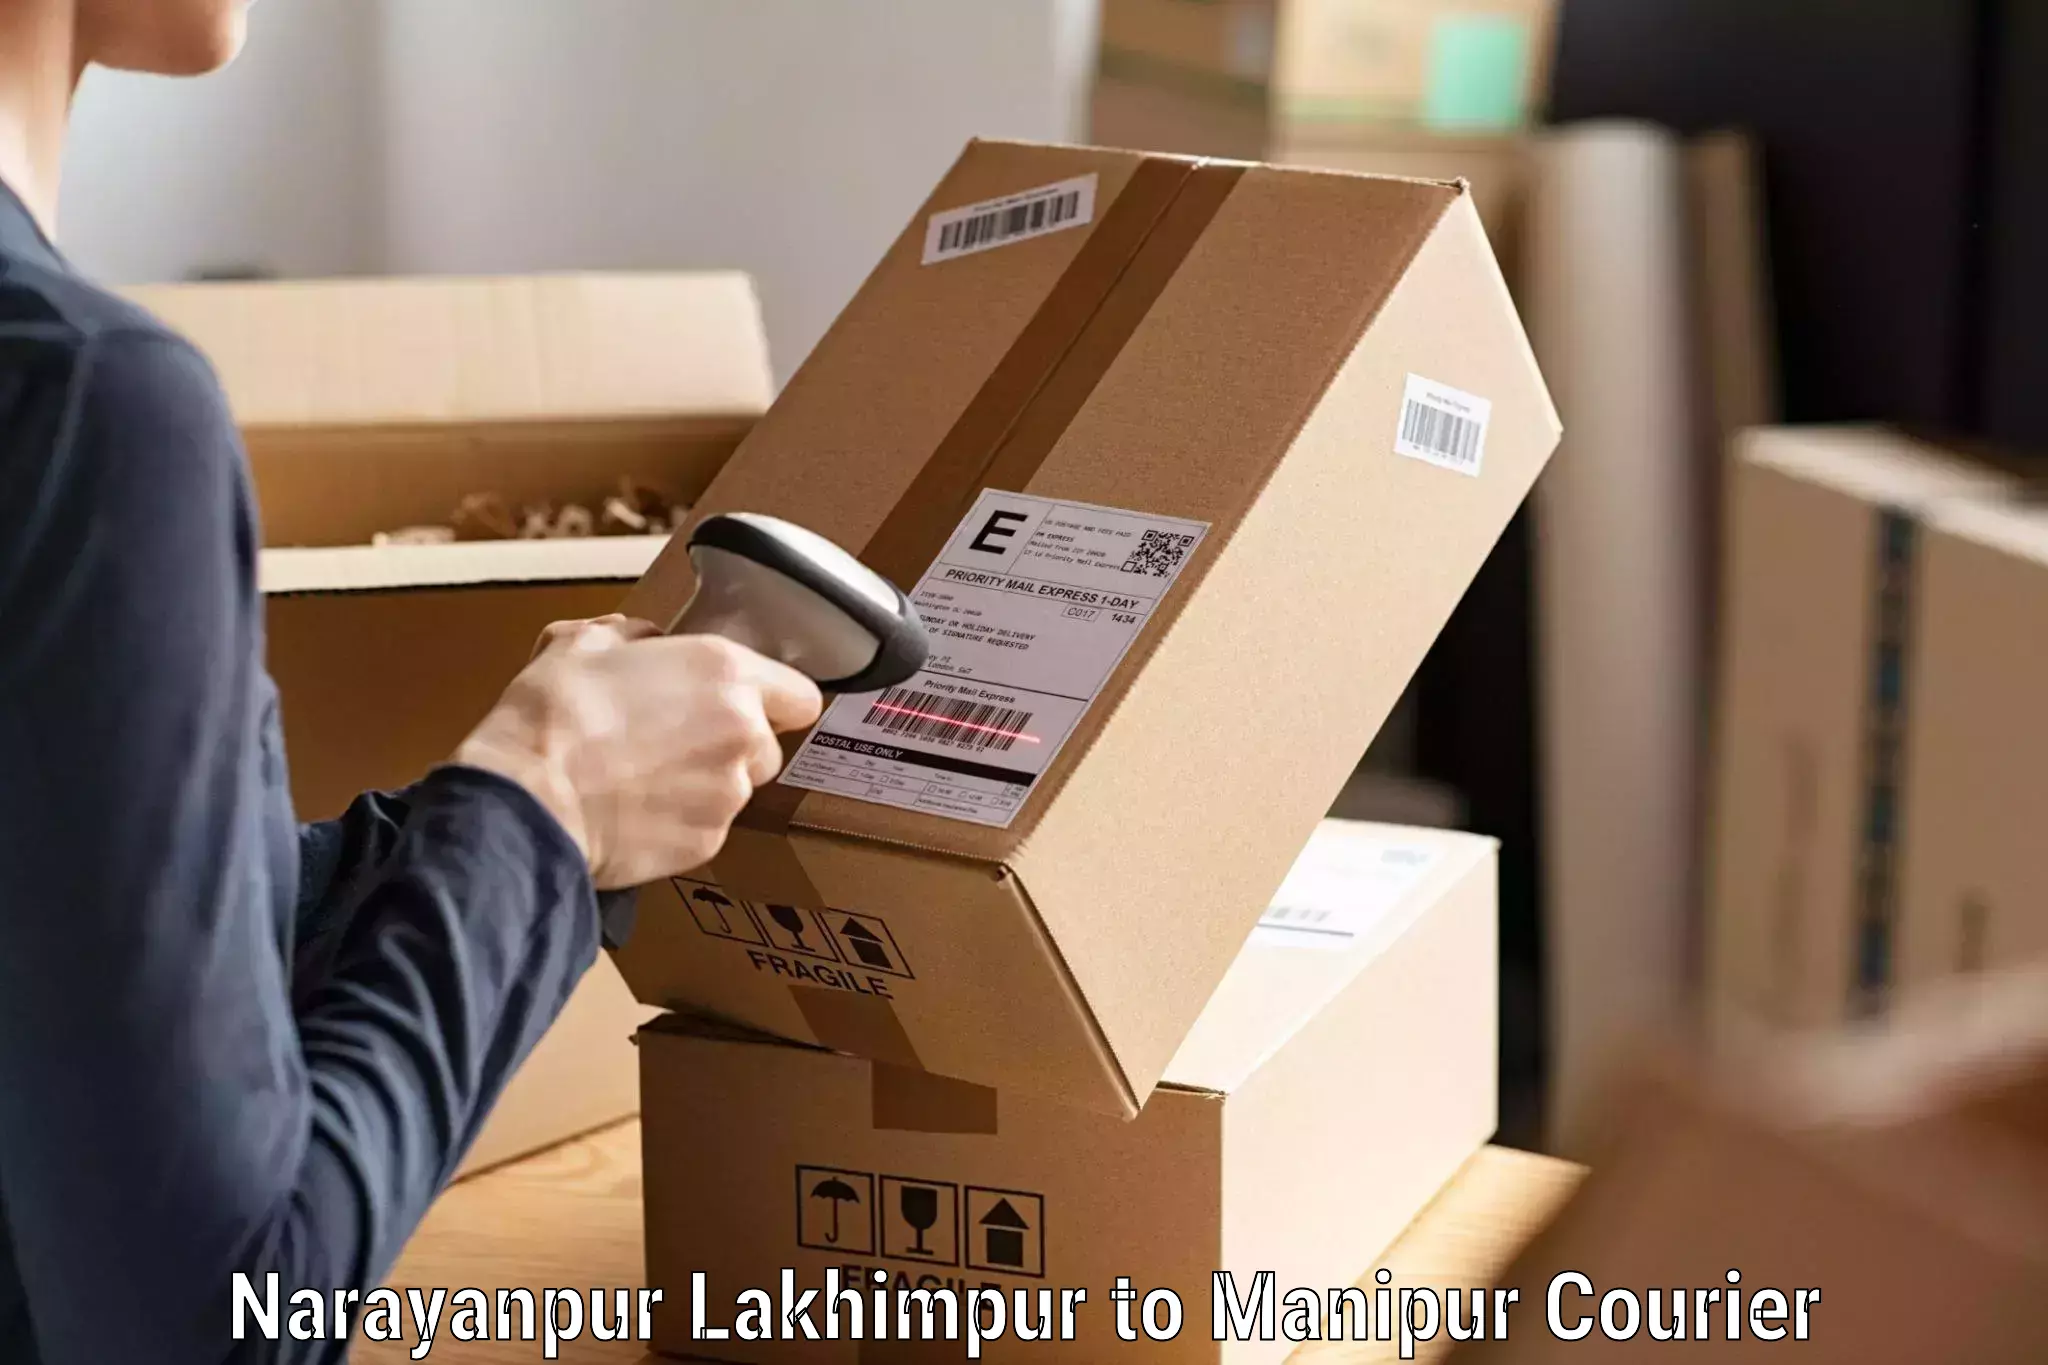 Cargo delivery service Narayanpur Lakhimpur to Tamenglong